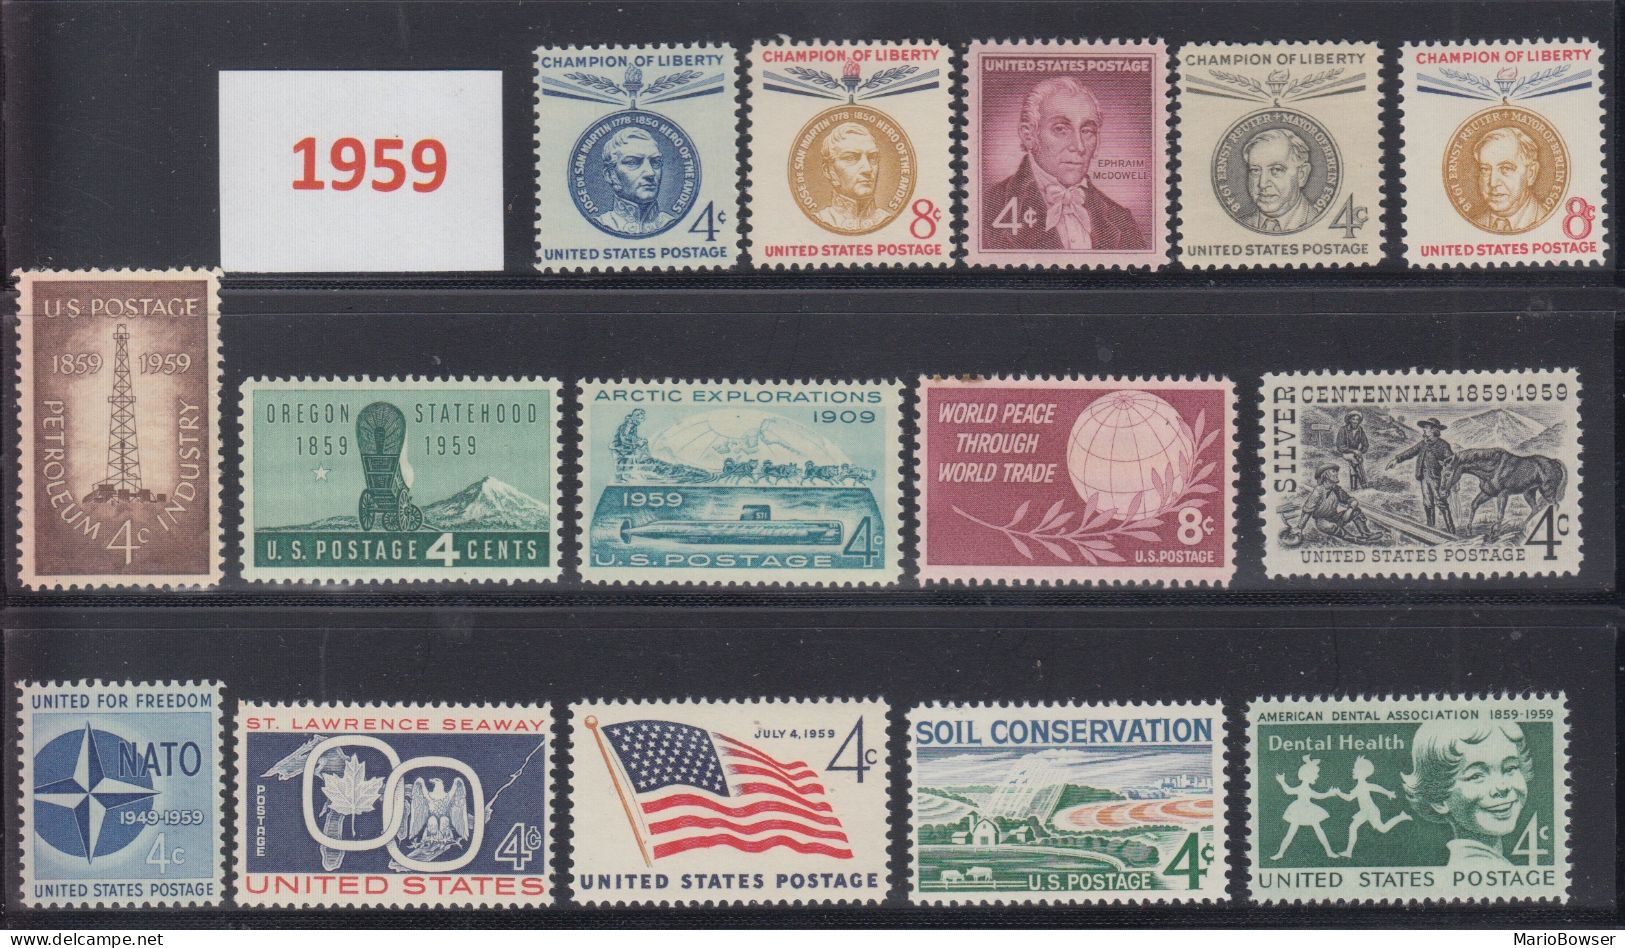 USA 1959 Full Year Commemorative MNH Stamps Set SC# 1124-1138 With 15 Stamps - Annate Complete